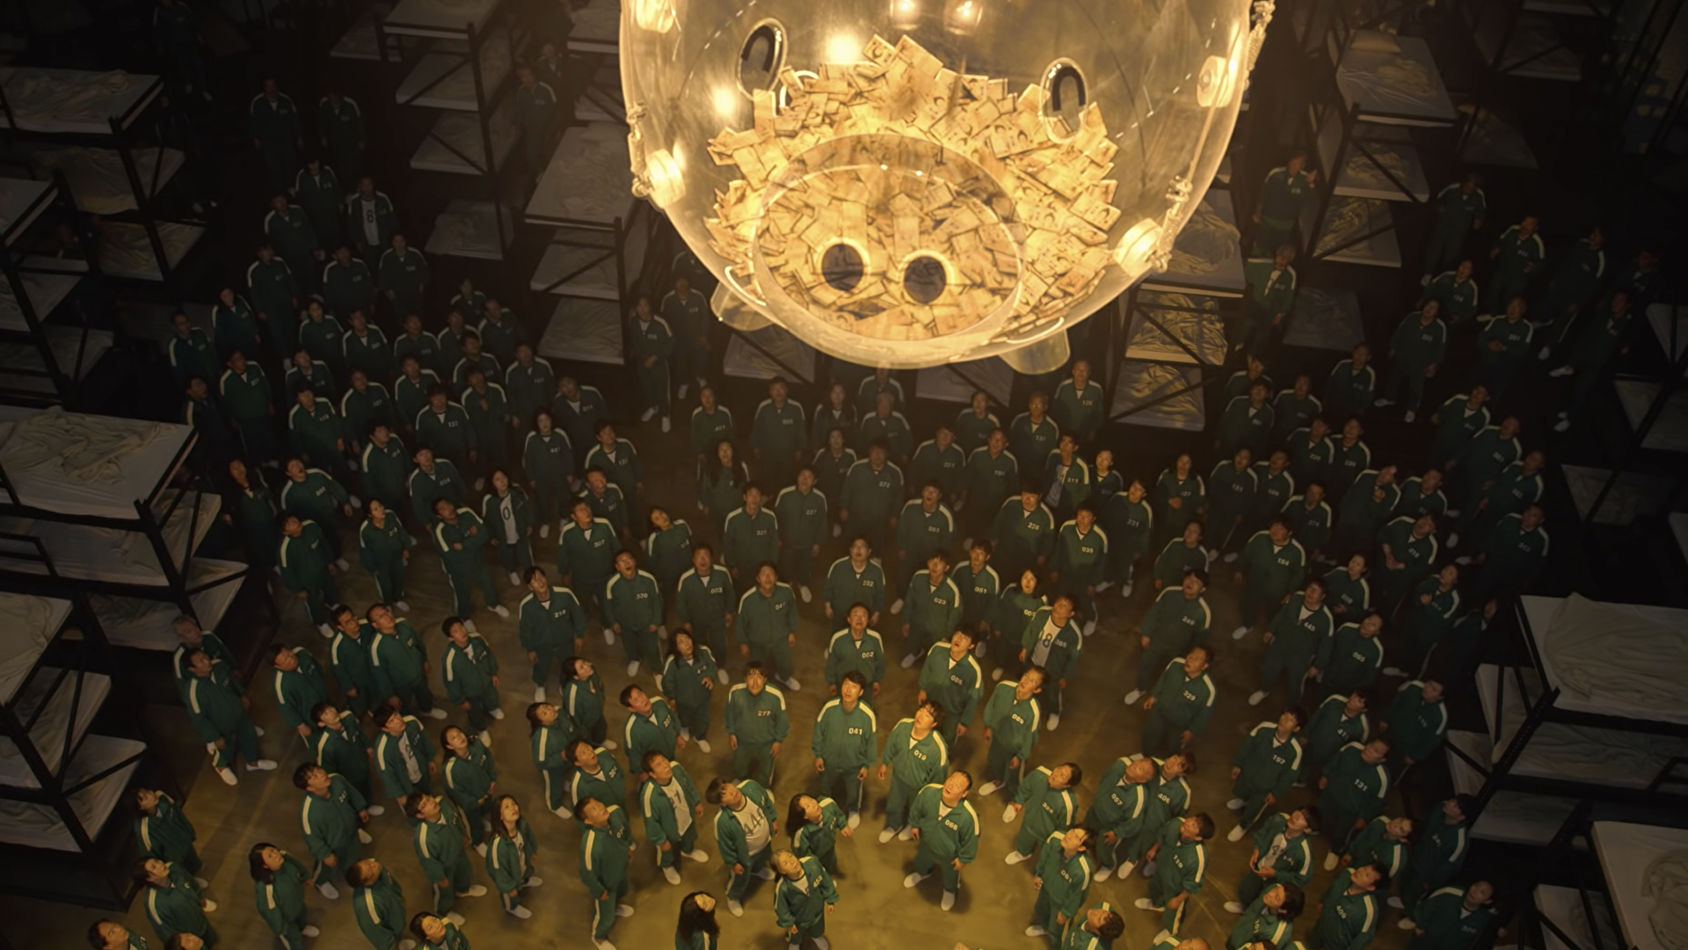 Credit to Netflix. Squid Game players look up at the big golden piggy bank full of money.